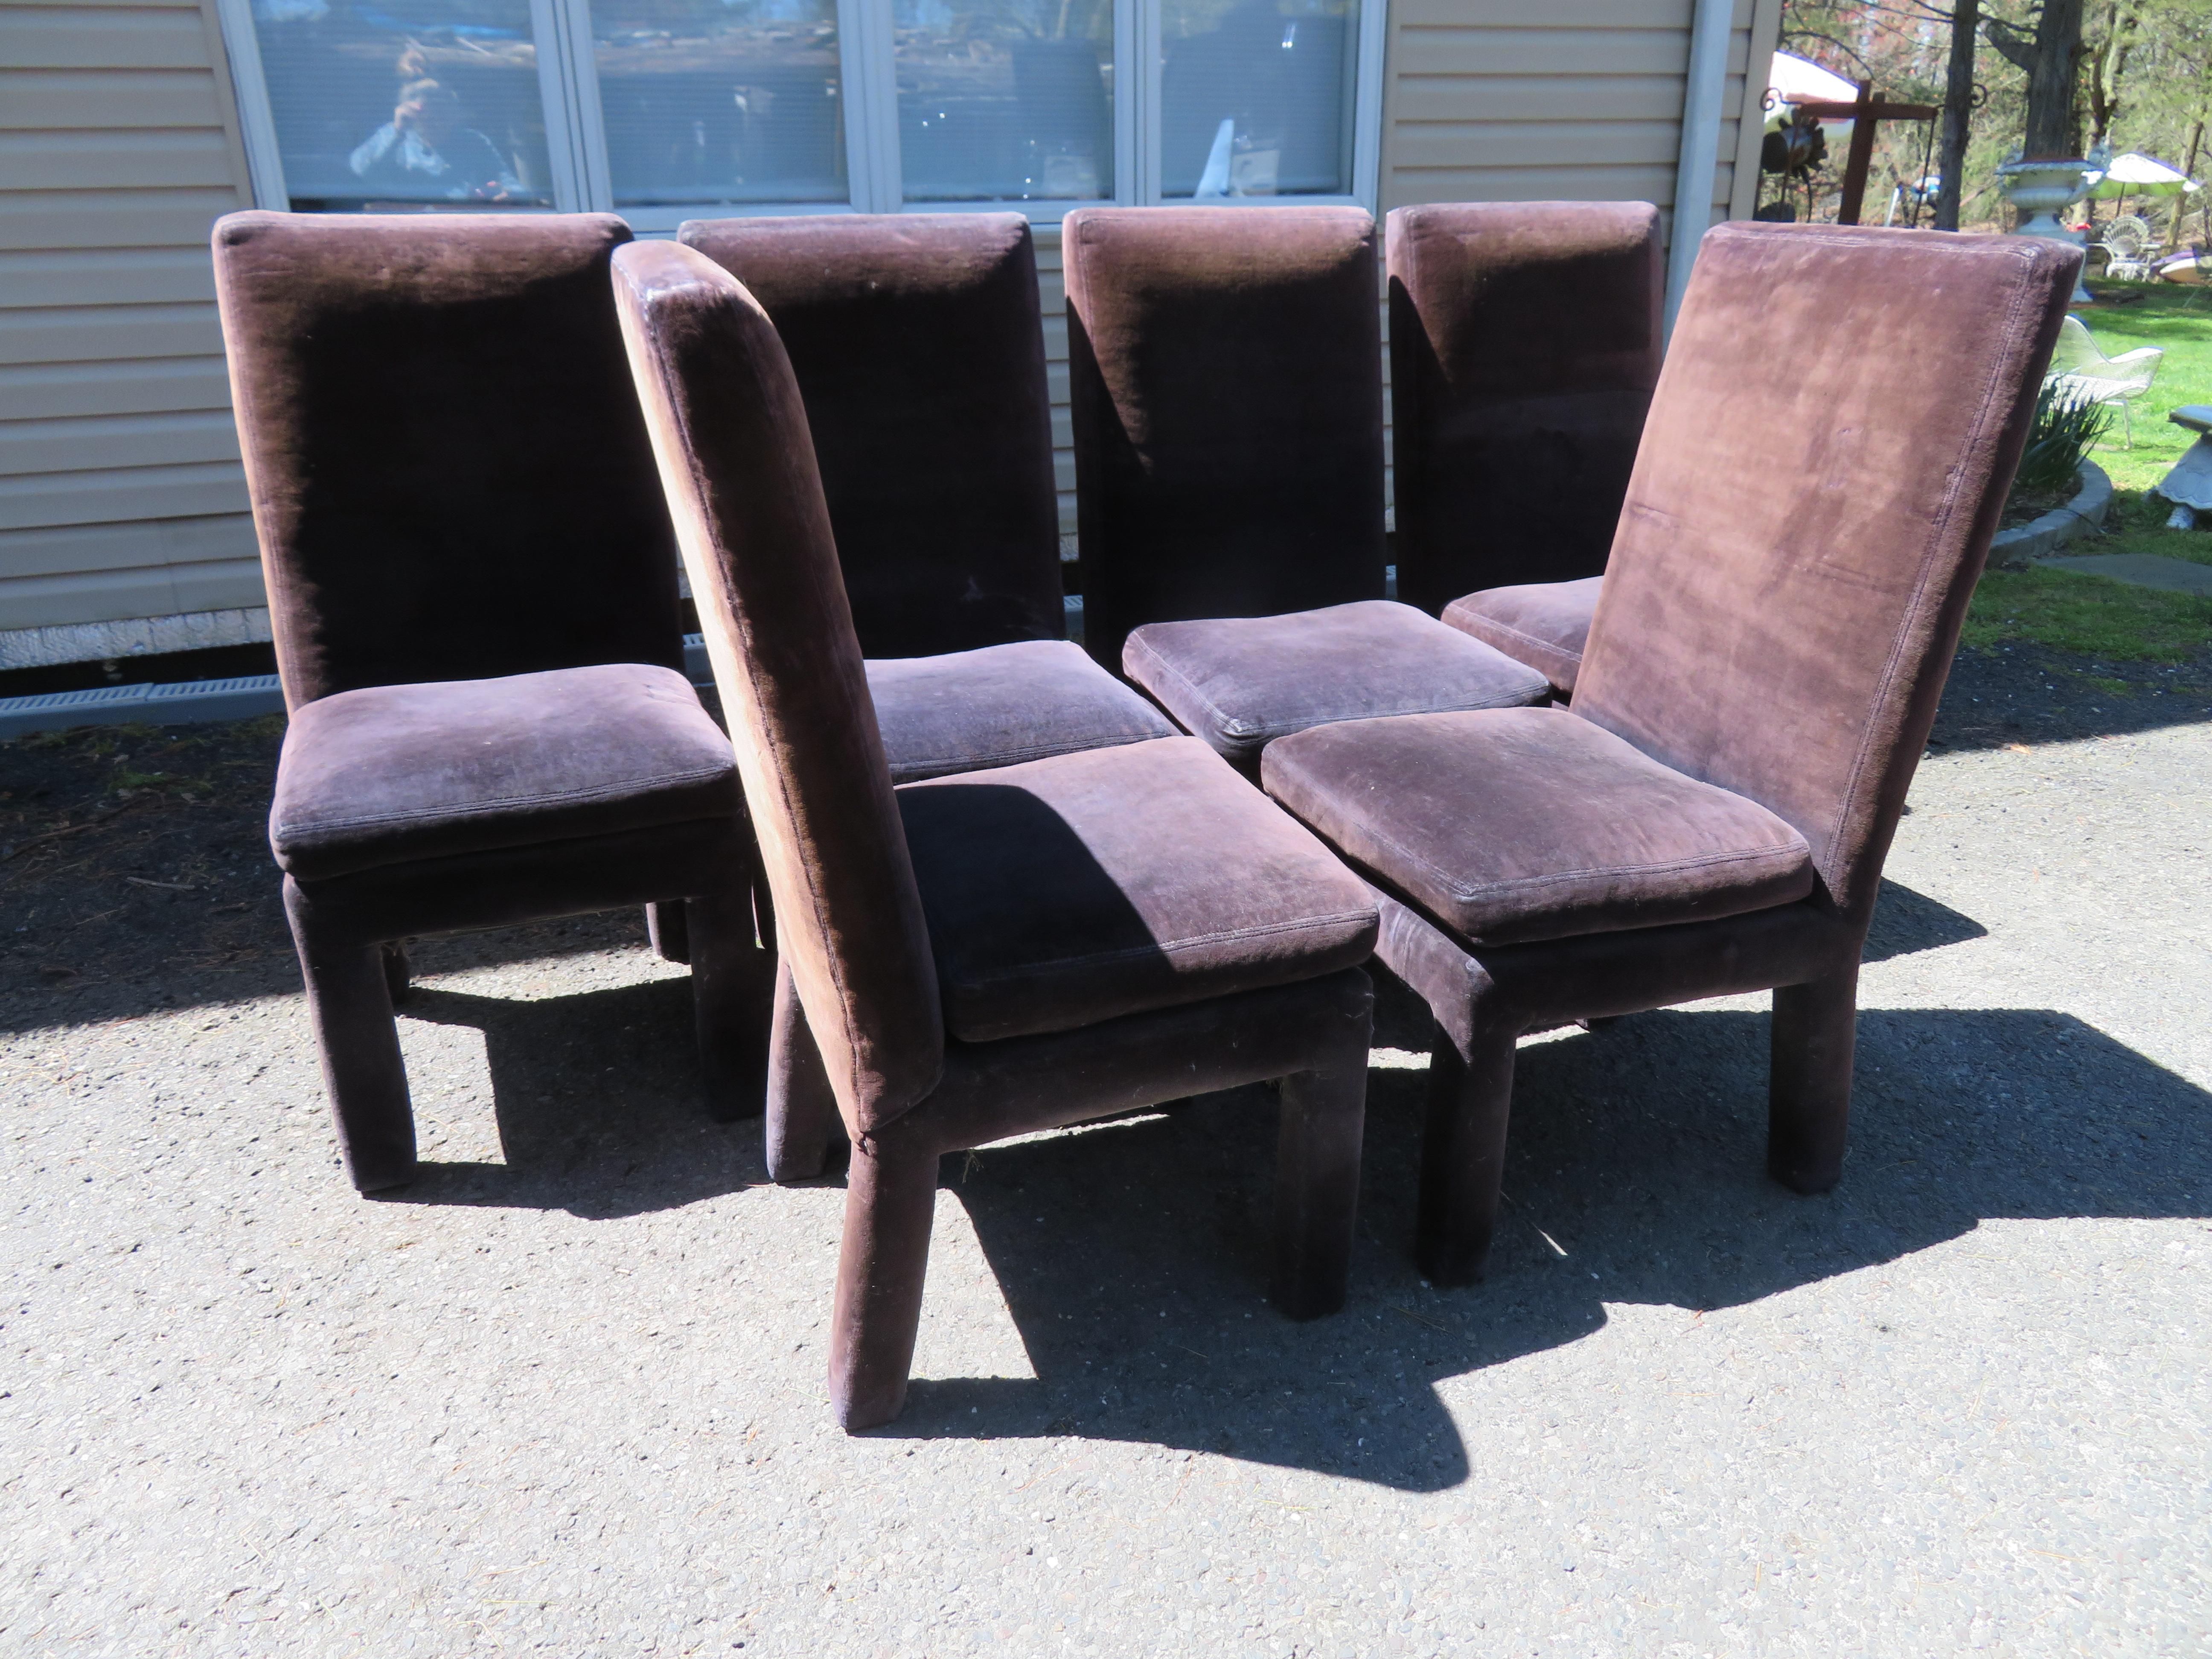 Gorgeous set of 6 signed Milo Baughman upholstered dining chairs. This is the set you designers have been looking for-they need to be reupholstered. These are ohh so comfortable and great looking too.